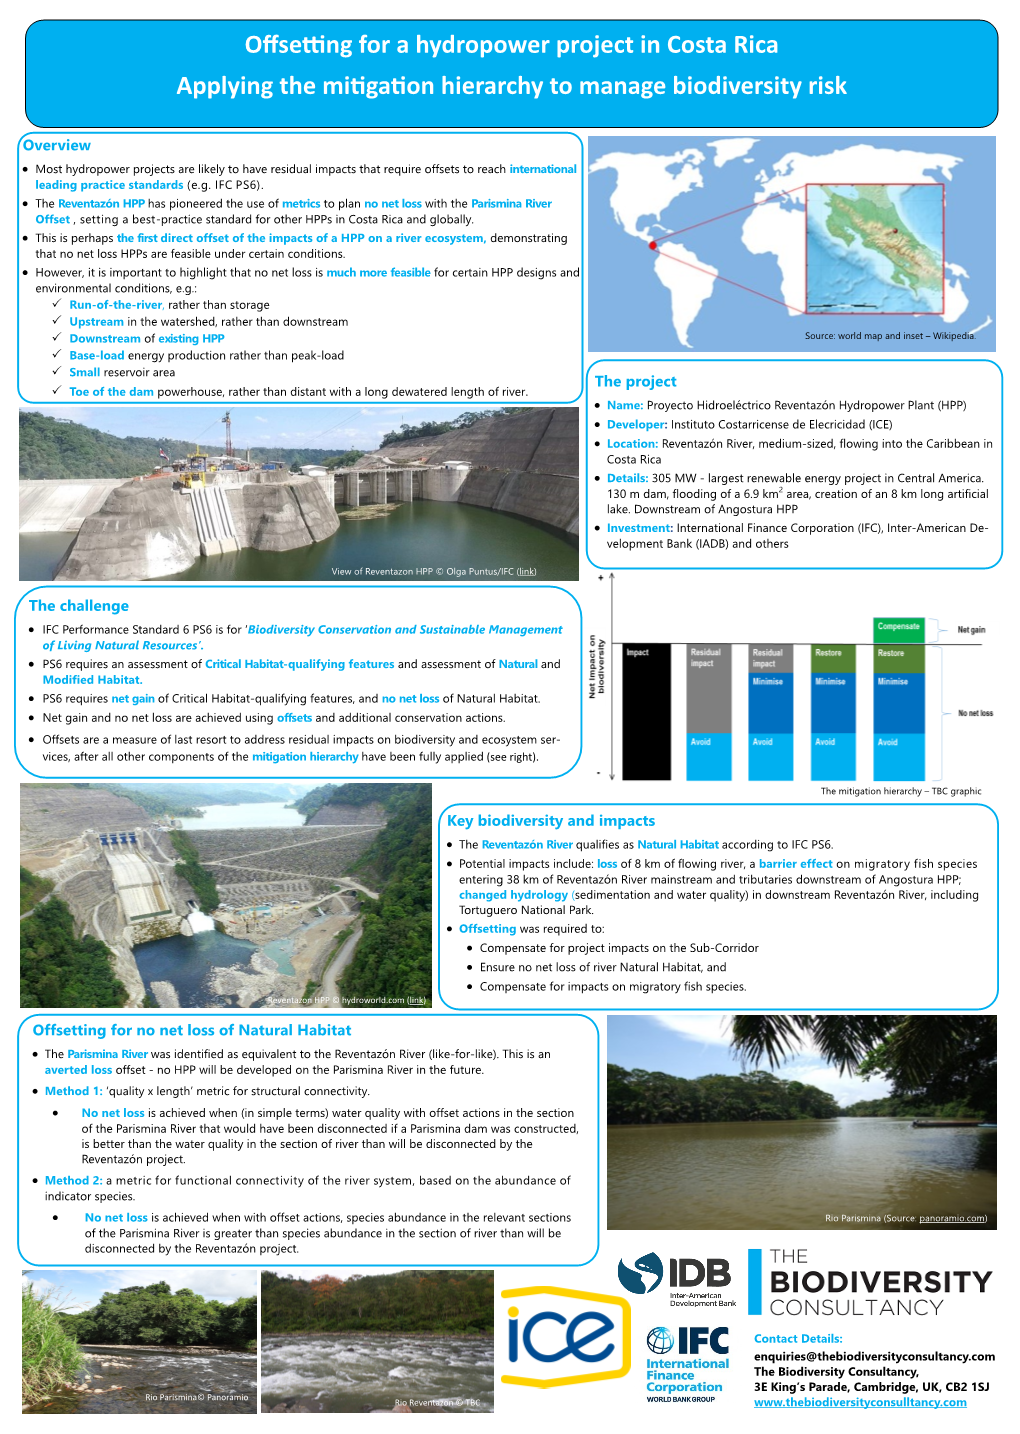 Offsetting for a Hydropower Project in Costa Rica Applying the Mitigation Hierarchy to Manage Biodiversity Risk